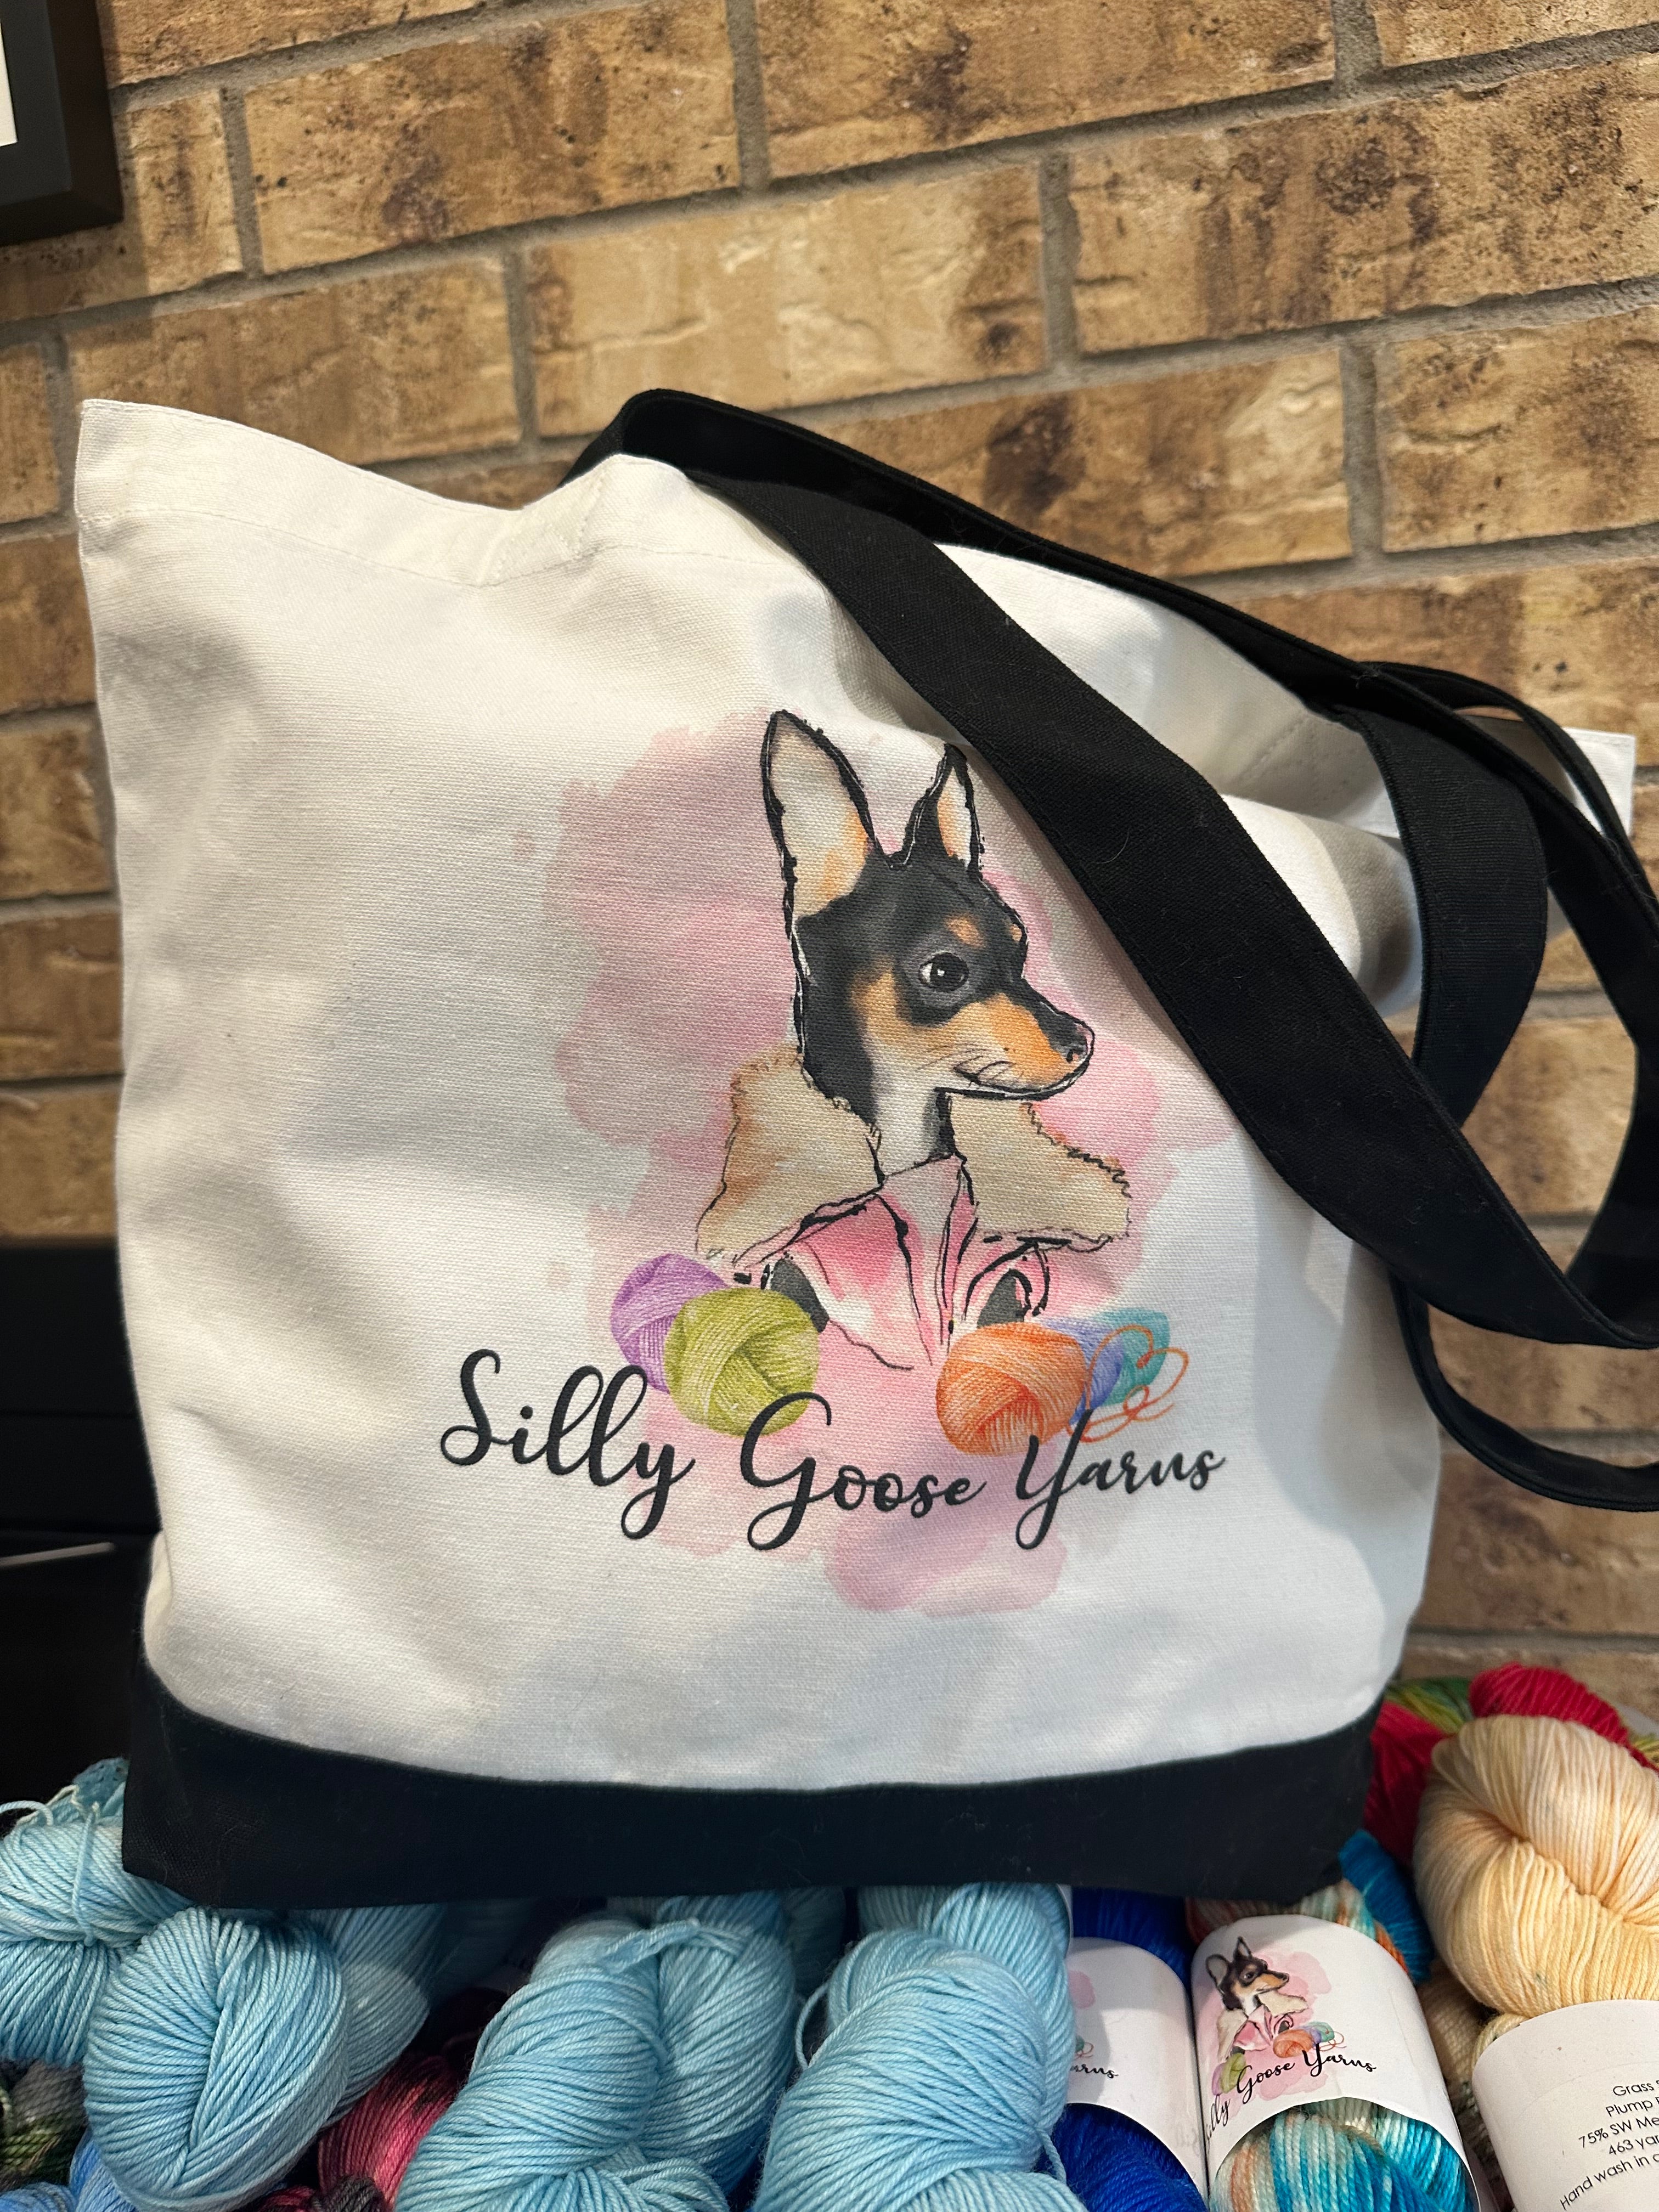 Silly Goose Yarns Tote Bag